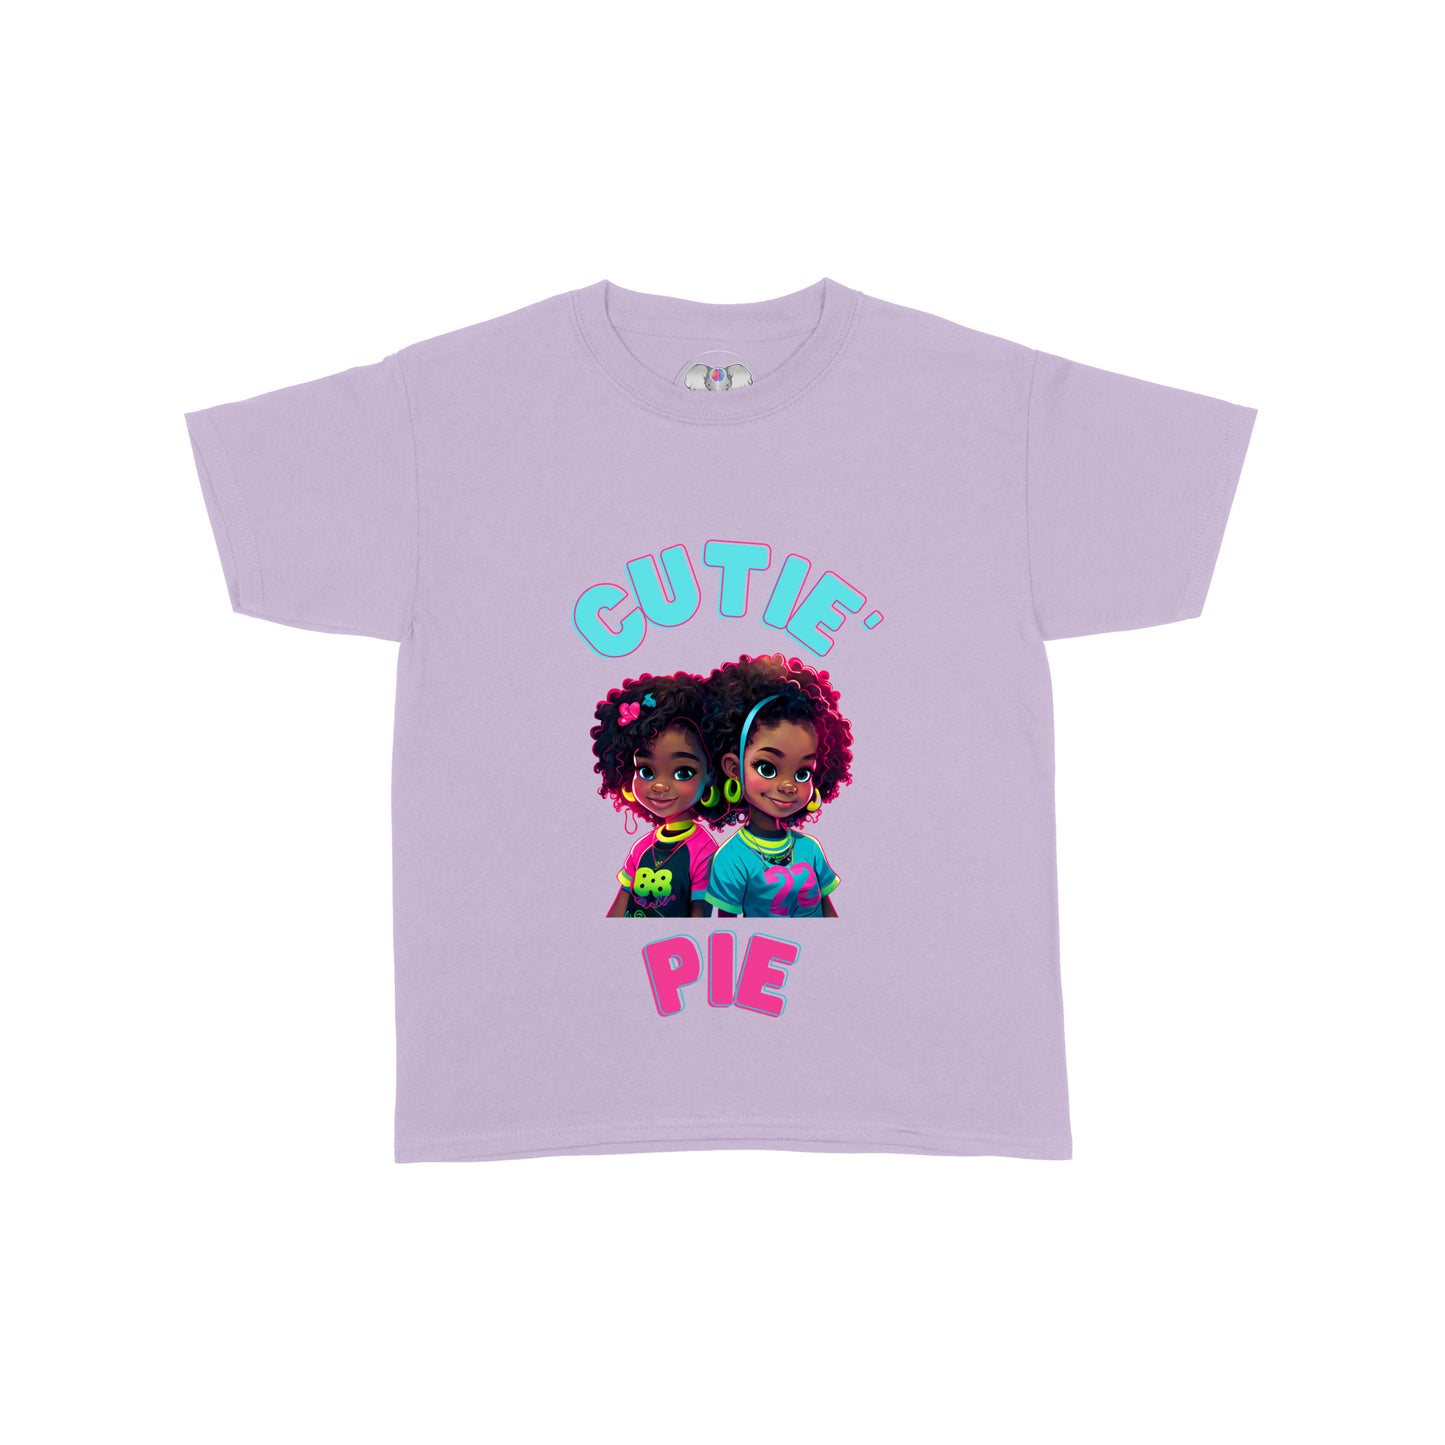 Cutie' Pie Graphic T-shirt Youth